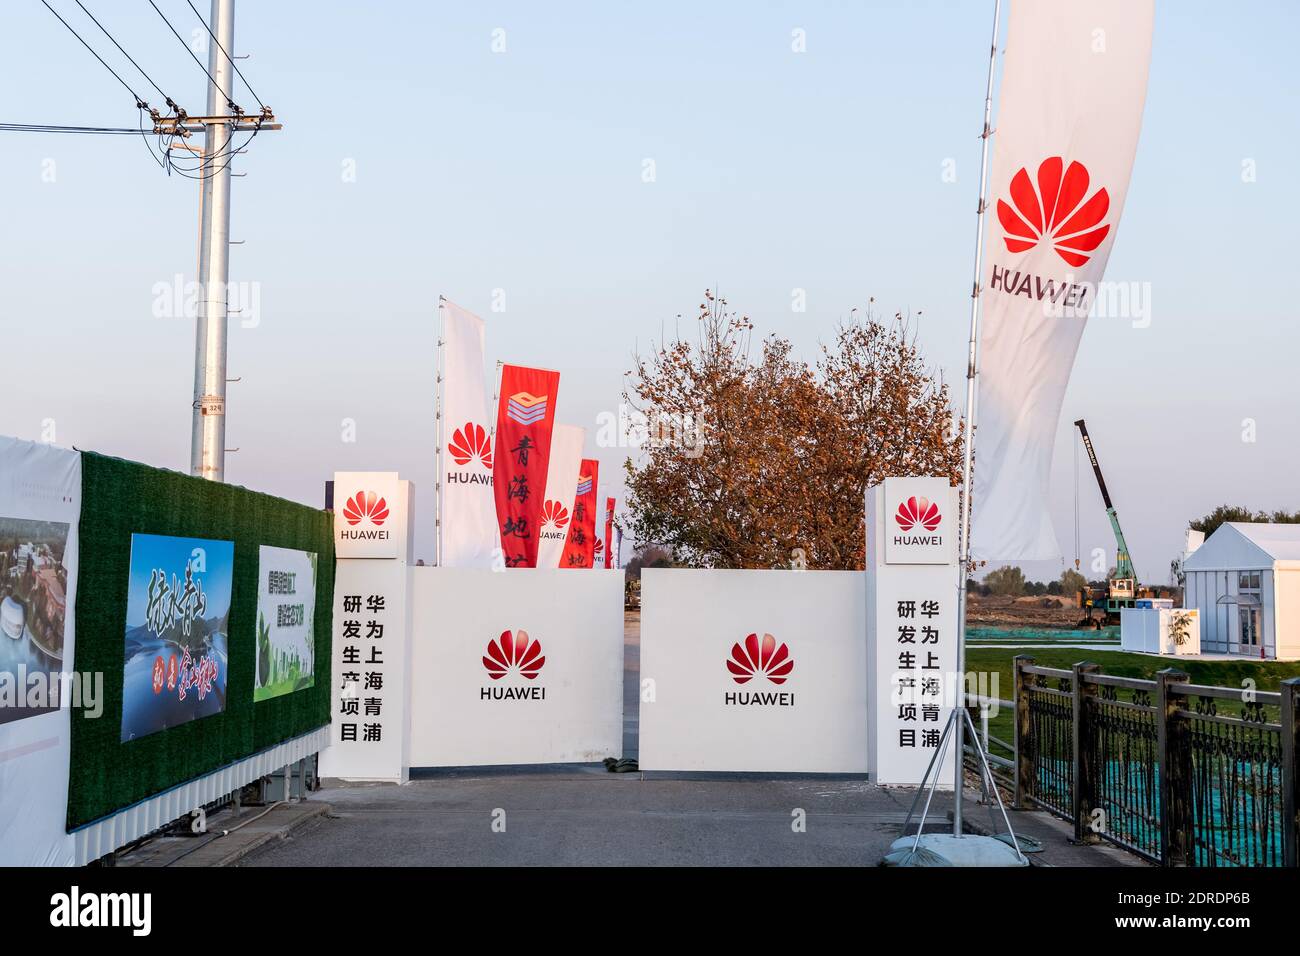 The Huawei Qingpu R&D base under construction is pictured in Qingpu district, Shanghai, China, 15 December 2020. Stock Photo